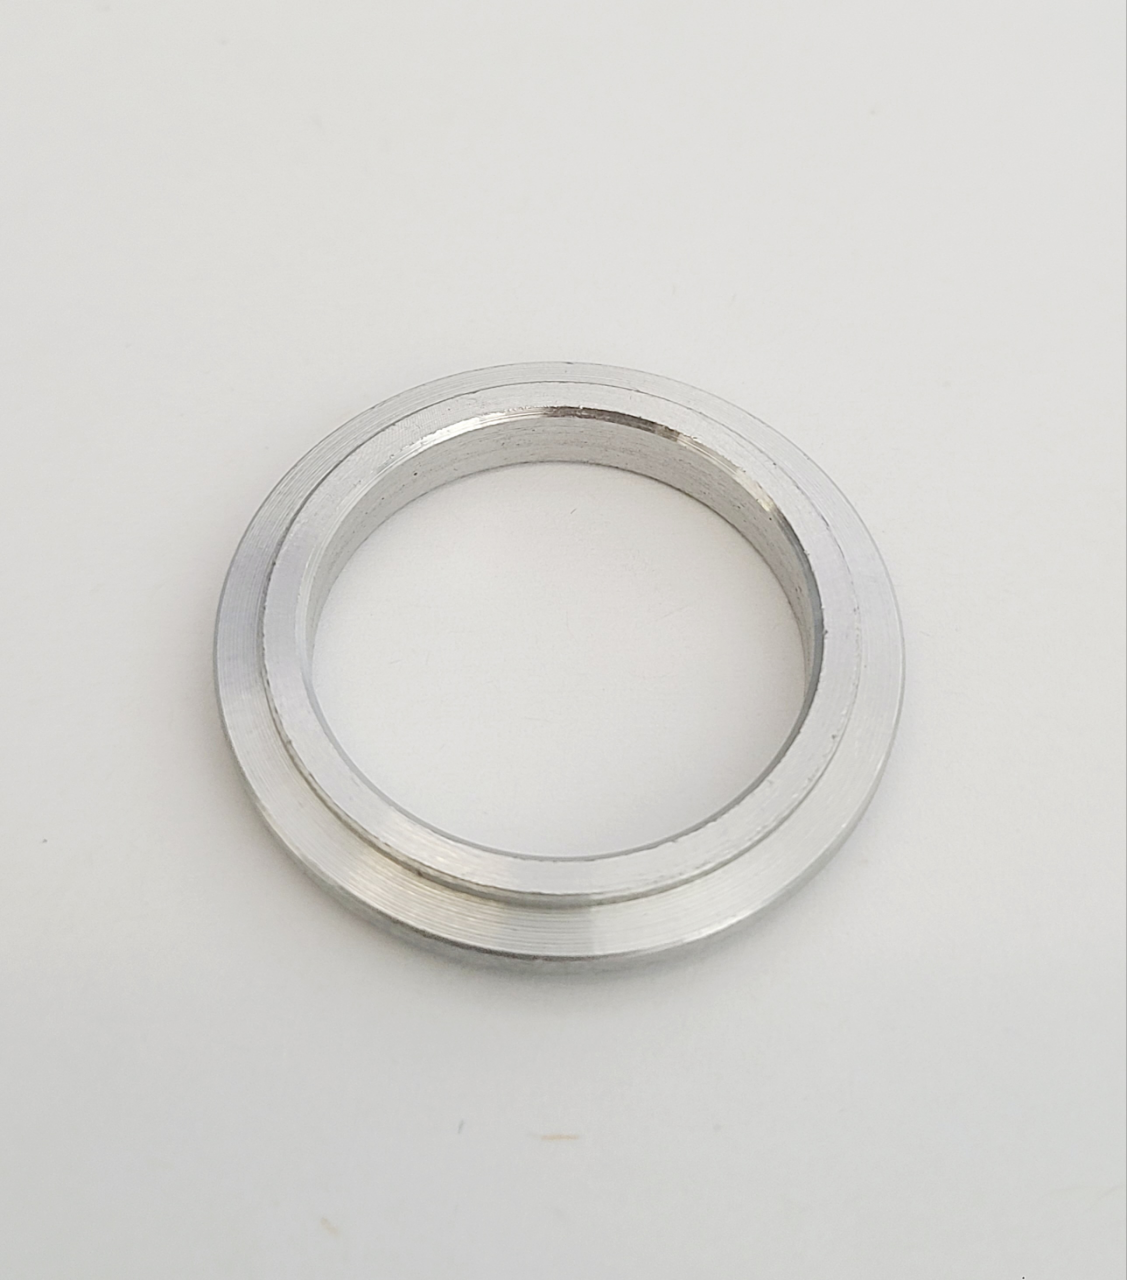 Swift Aluminum Spindle Spacer - 25x5mm